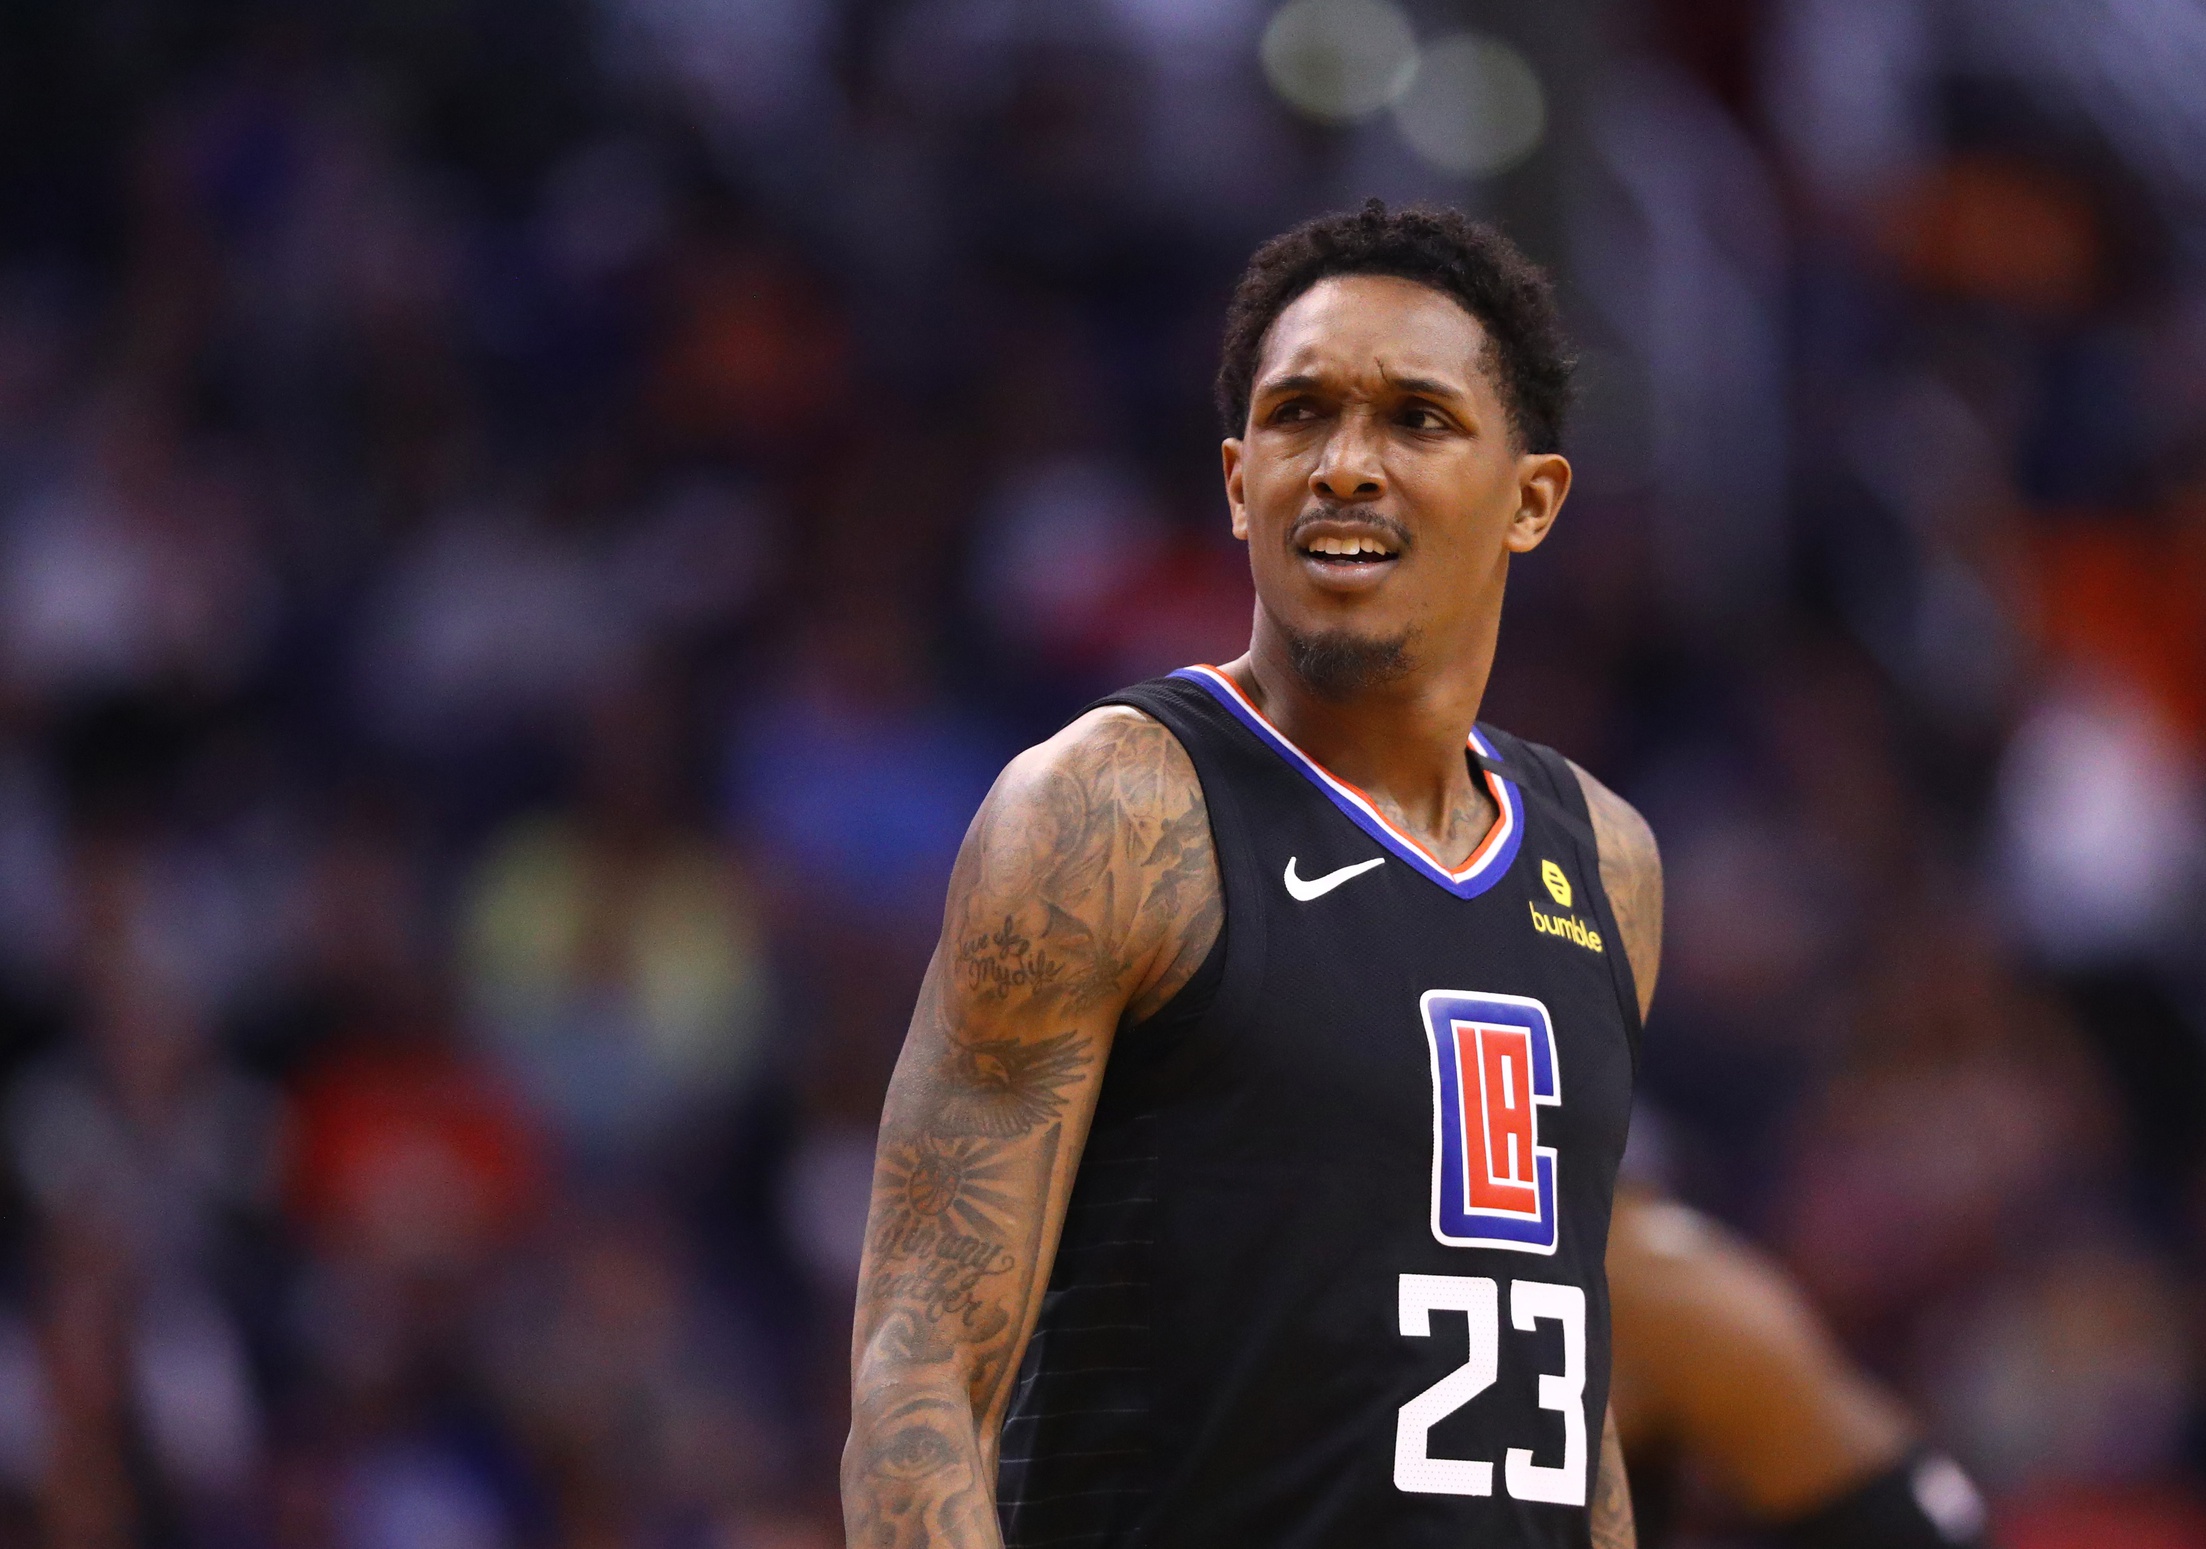 Clippers' Lou Williams will miss two games due to 10-day quarantine for